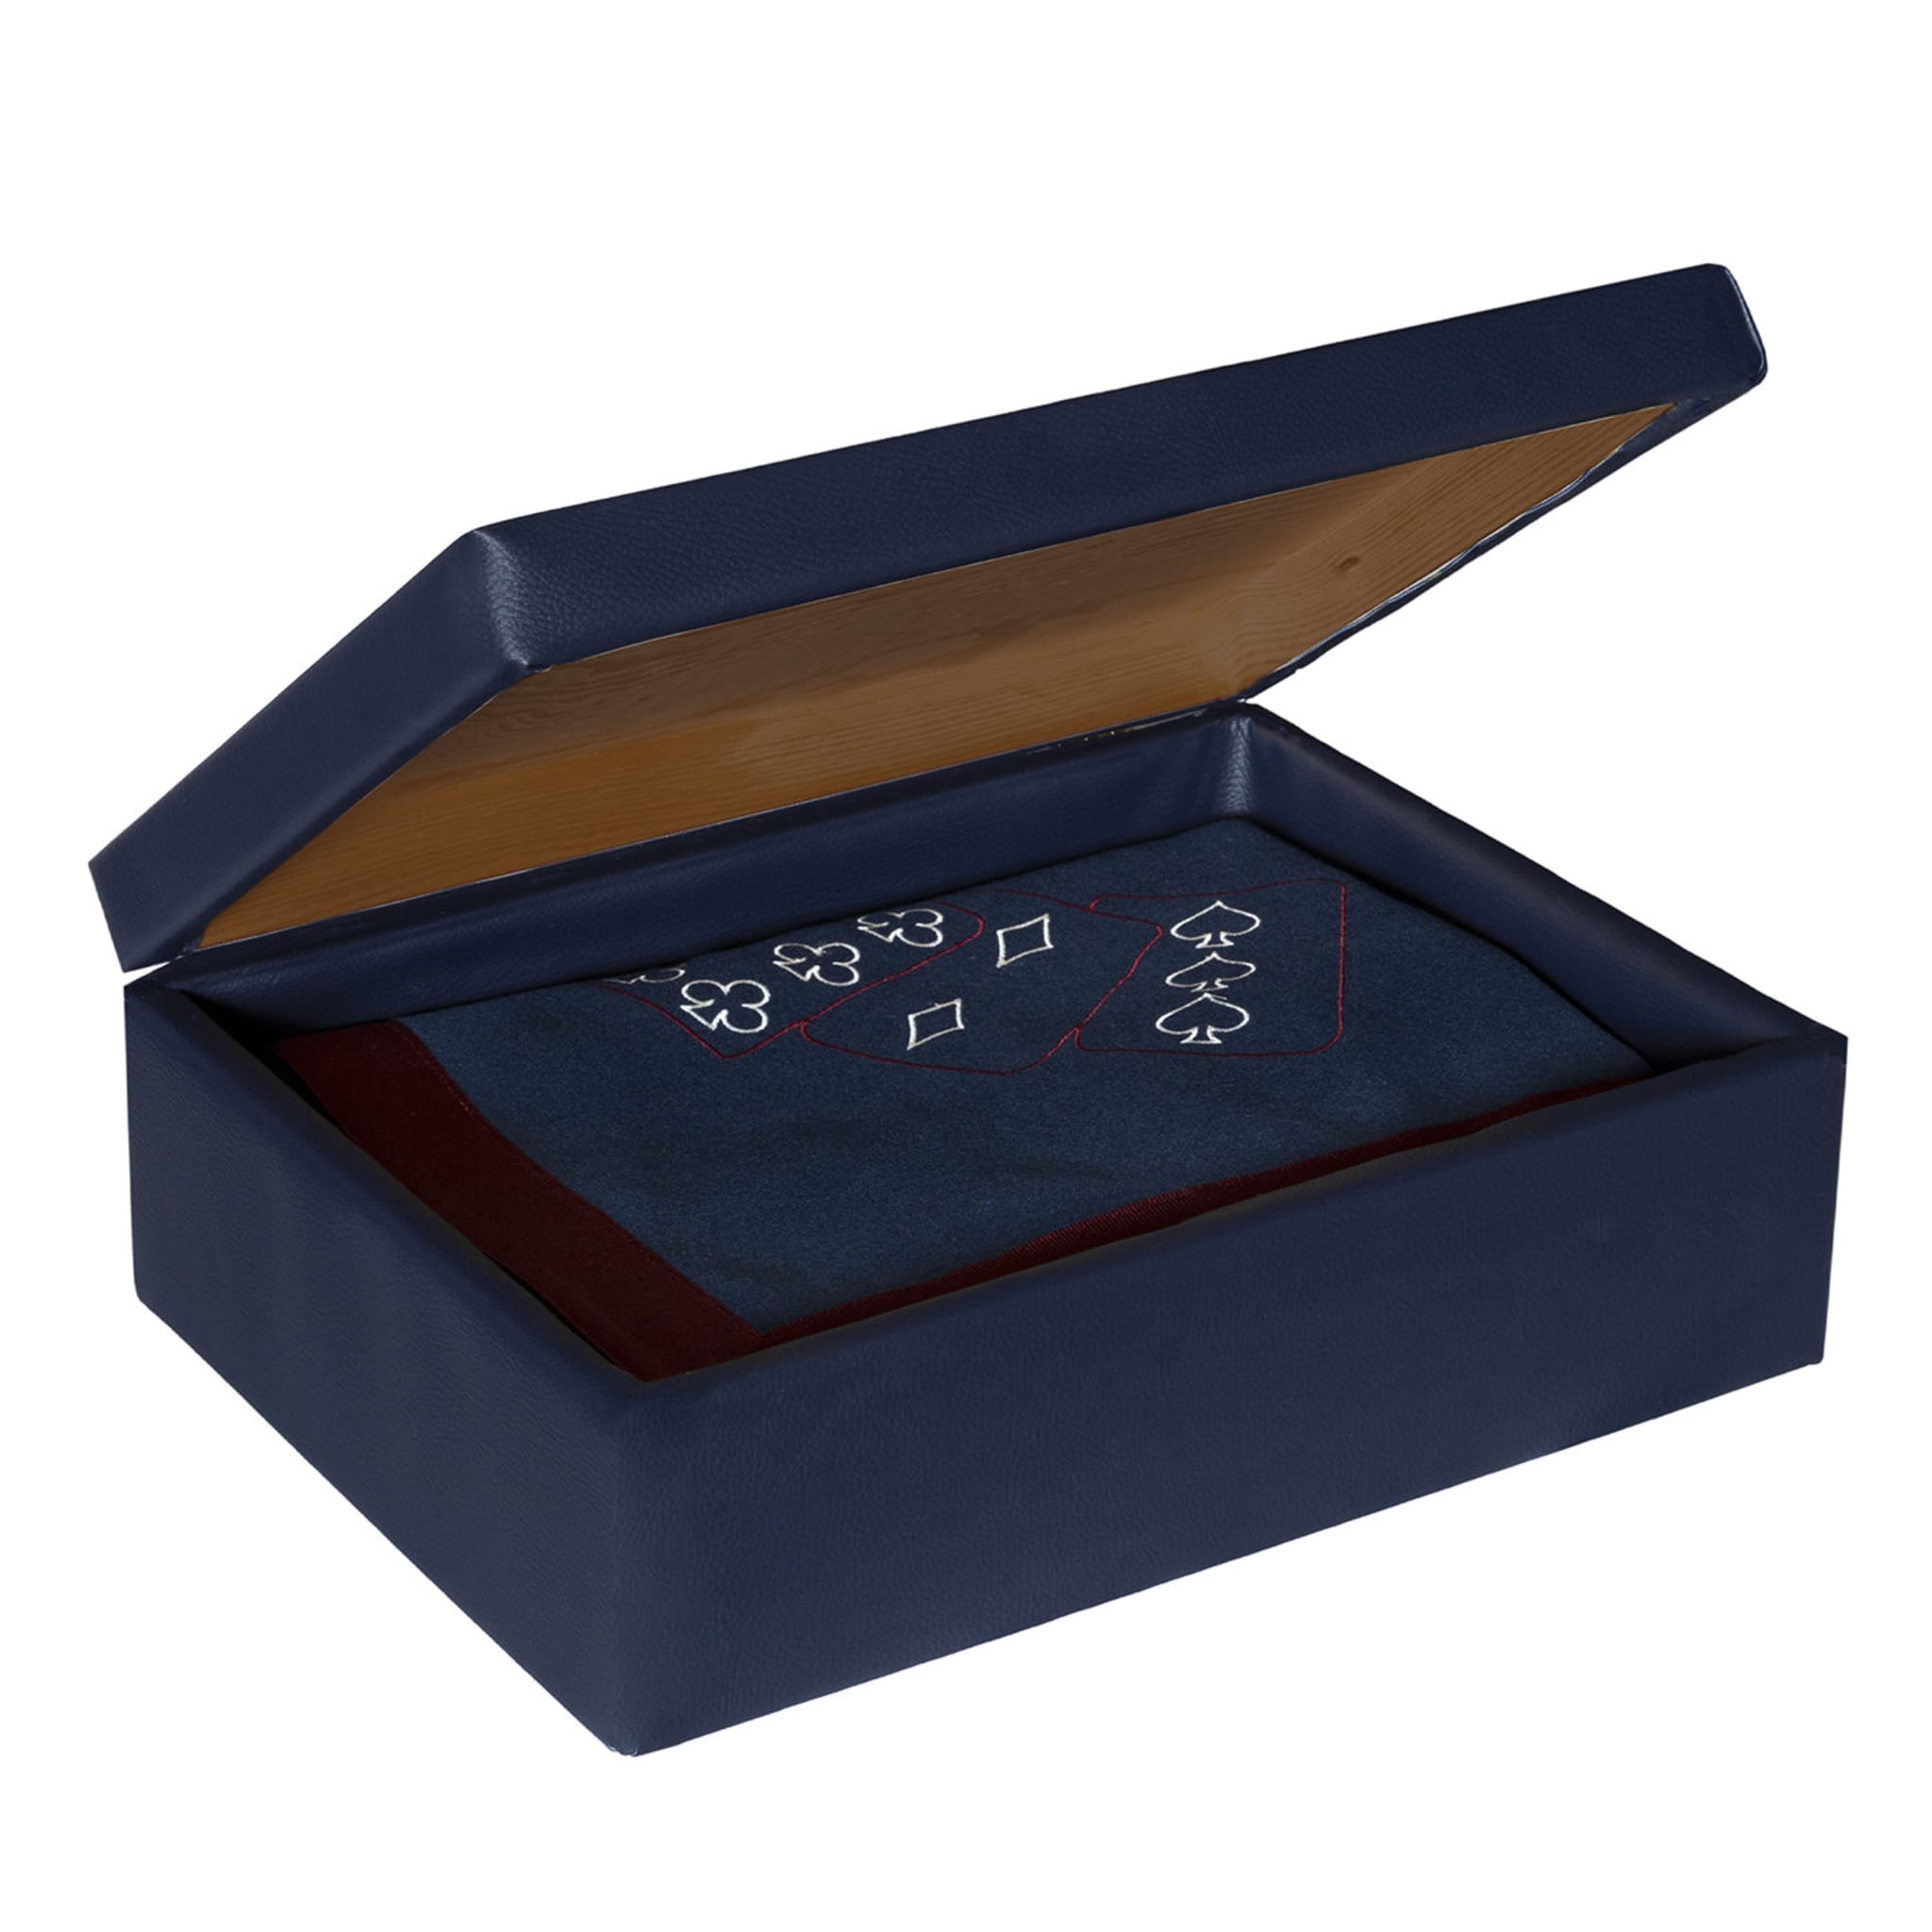 Game Tablecloth with Leather Box - Alternative view 1